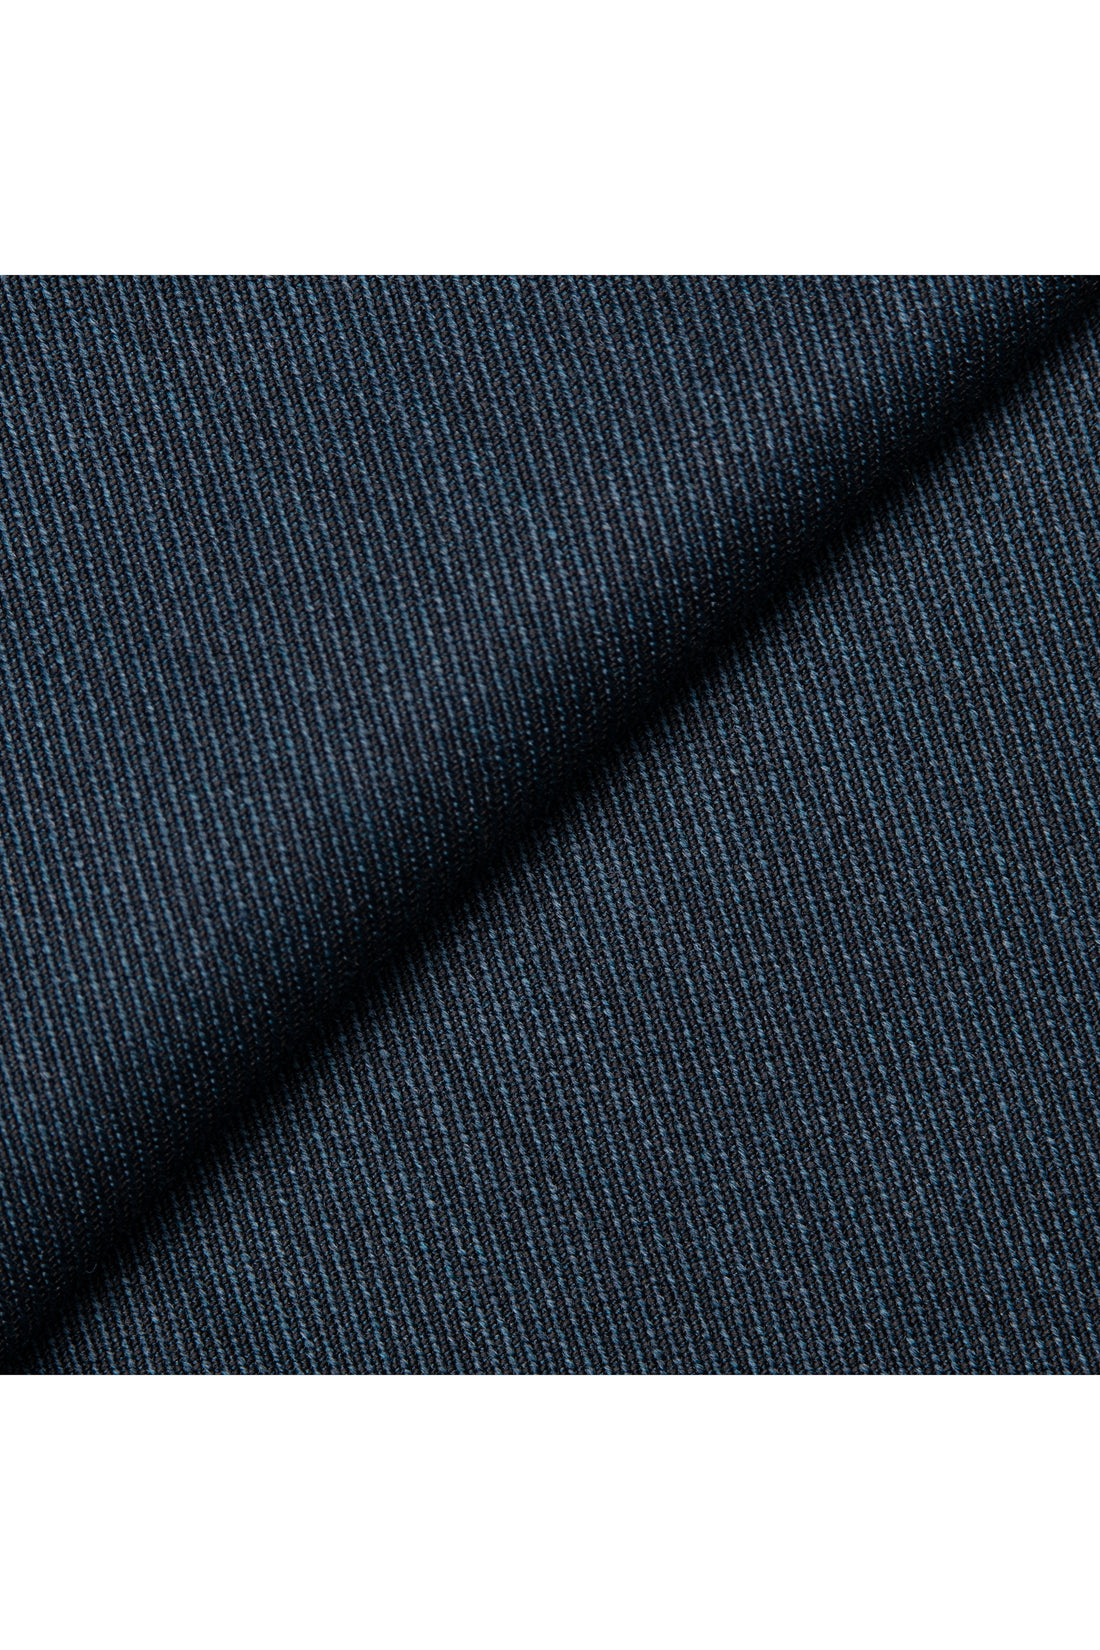 Blue Wool Stretch Whipcord Trousers fabric swatch